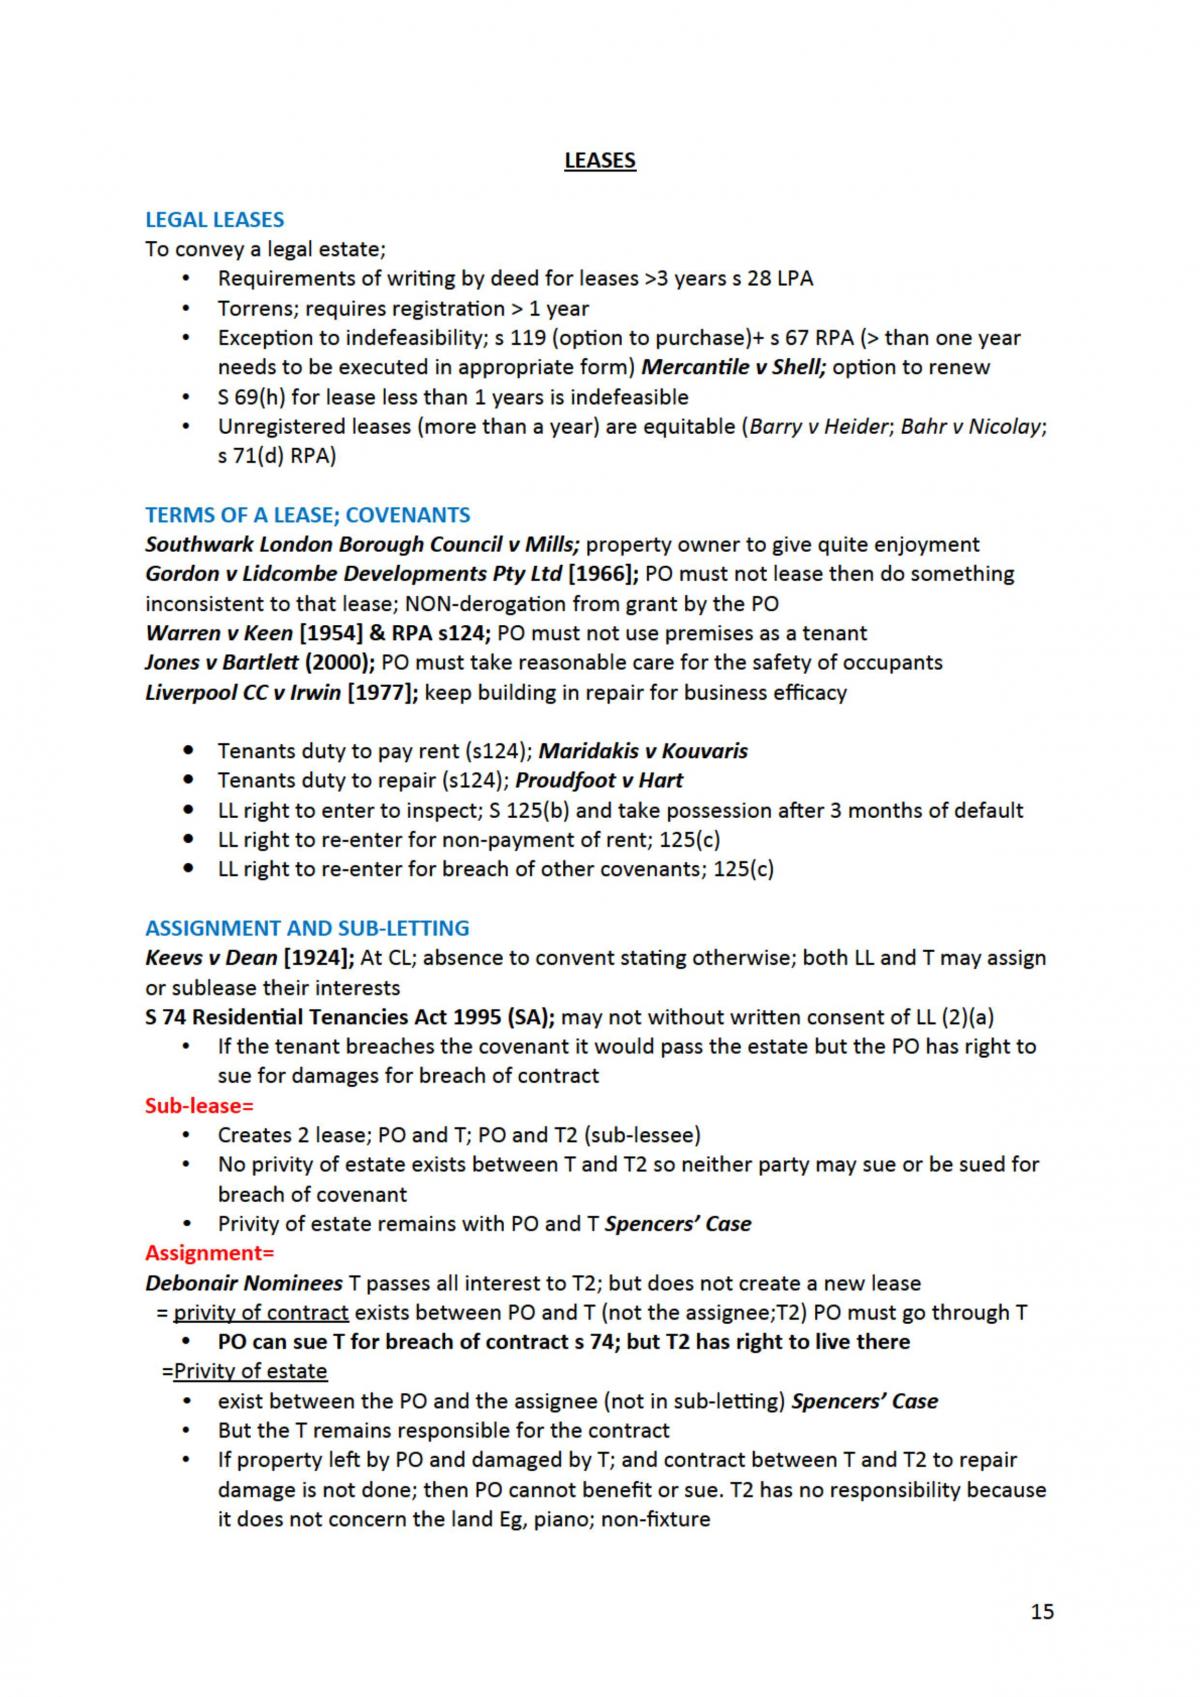 Complete real property notes - Page 15